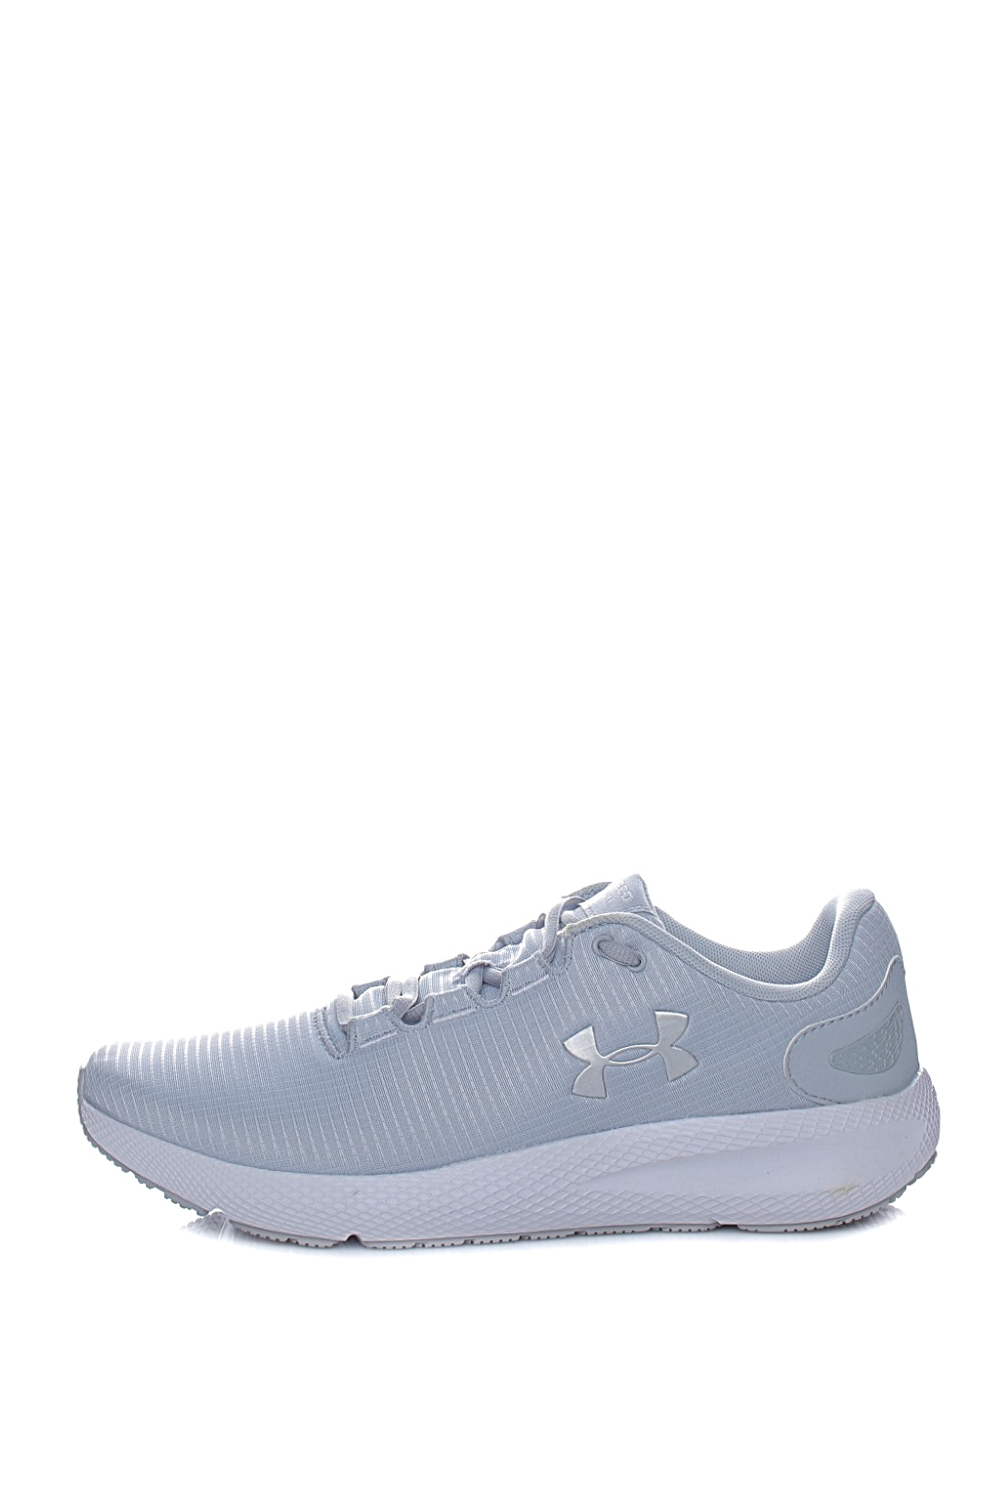 UNDER ARMOUR – Ανδρικα παπουτσια running UNDER ARMOUR Charged Pursuit 2 Rip γκρι